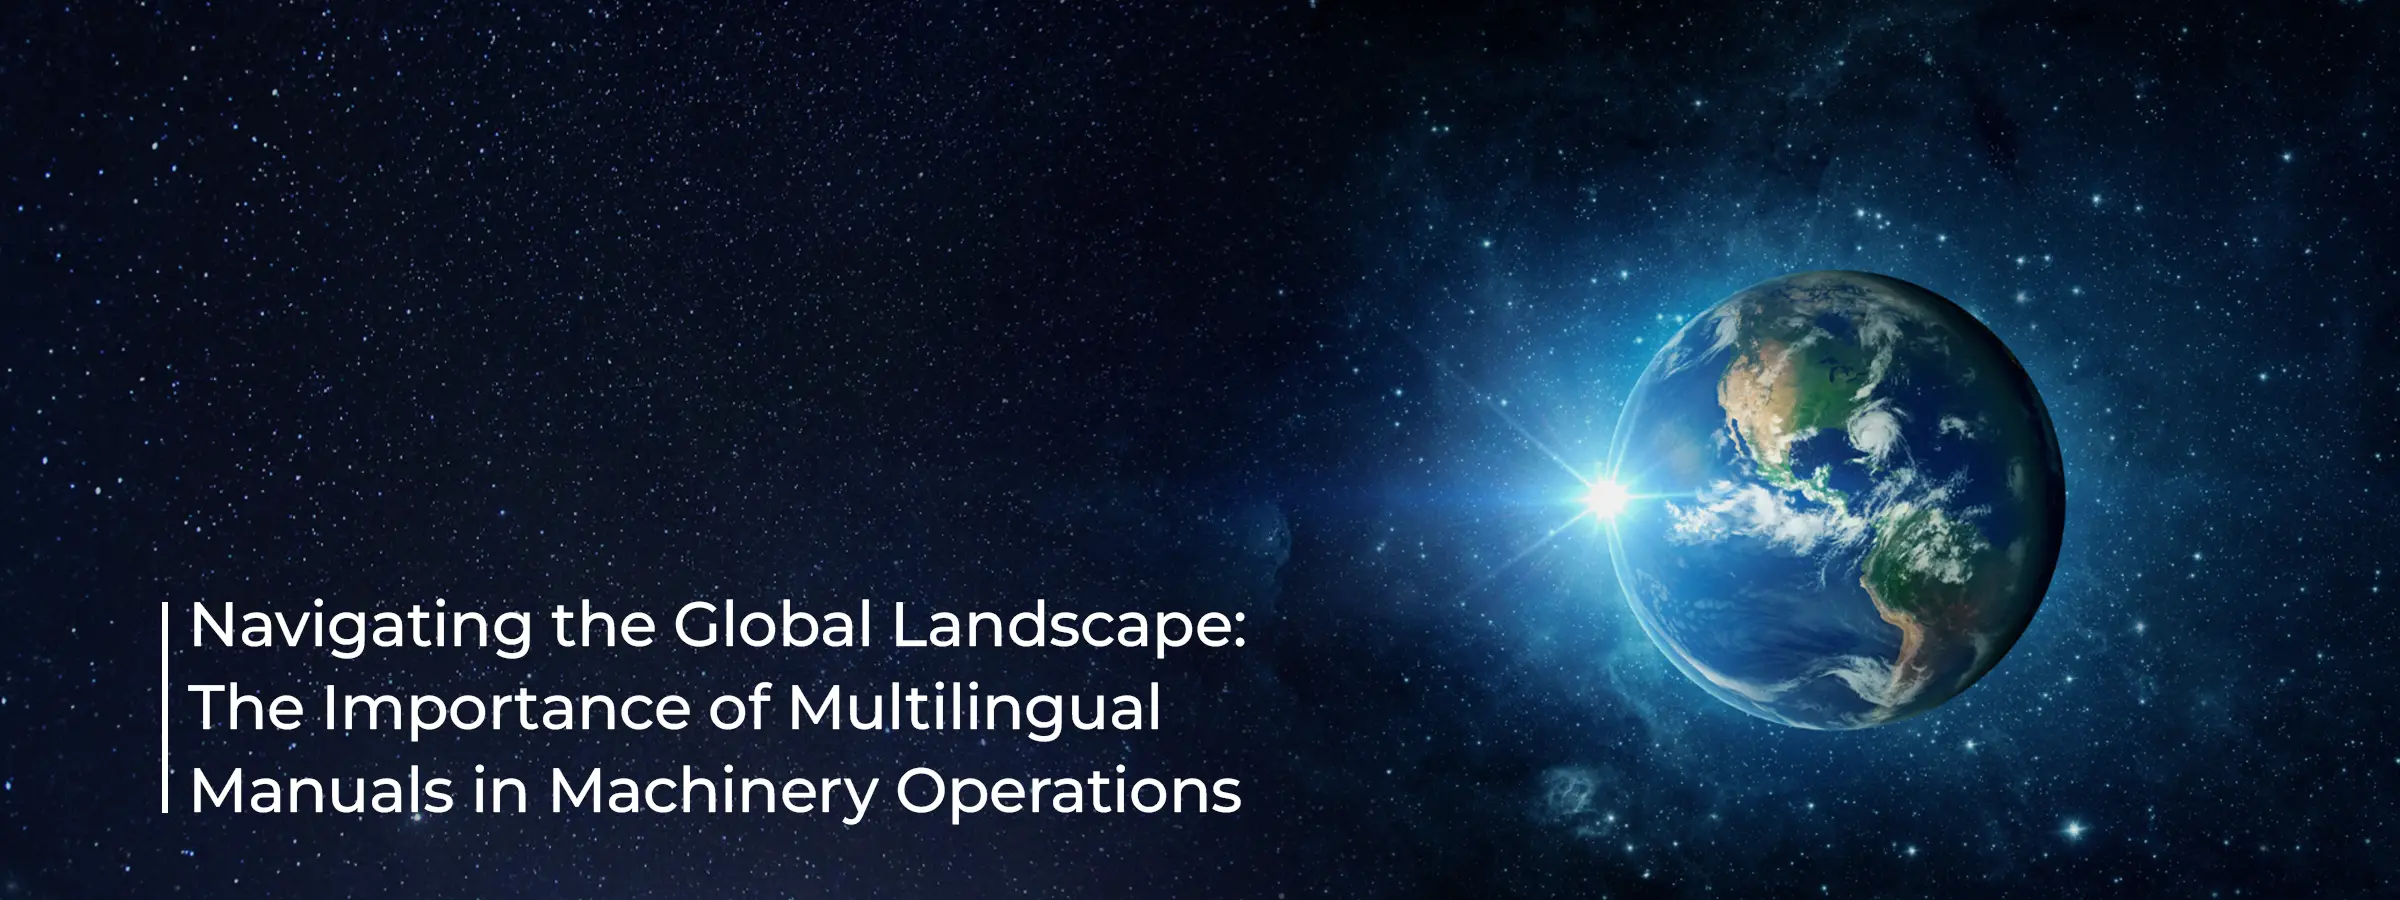 navigating-the-global-landscape-the-importance-of-multilingual-manuals-in-machinery-operations